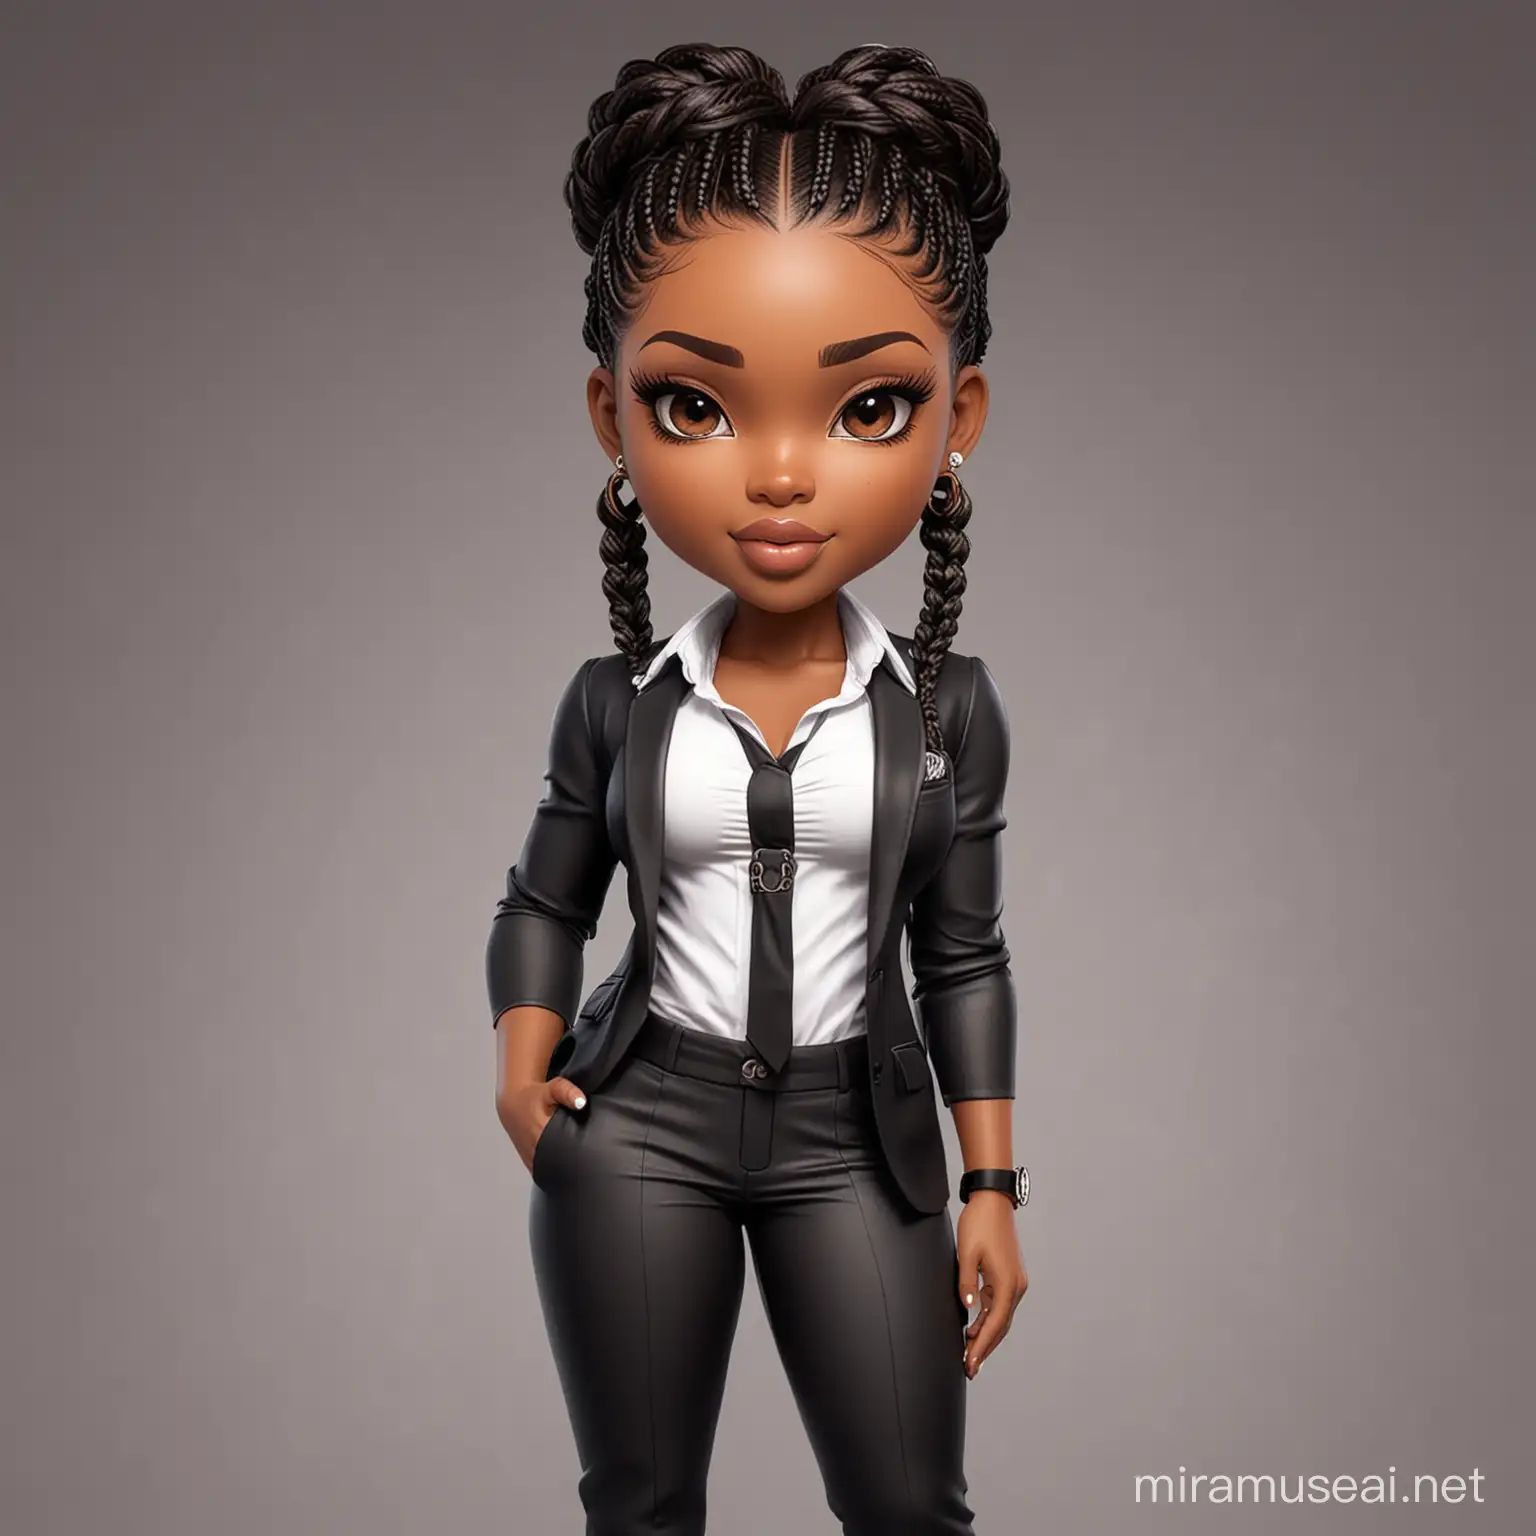 Stylish Black Woman in Luxury Suit and Braids Boss Babe Portrait